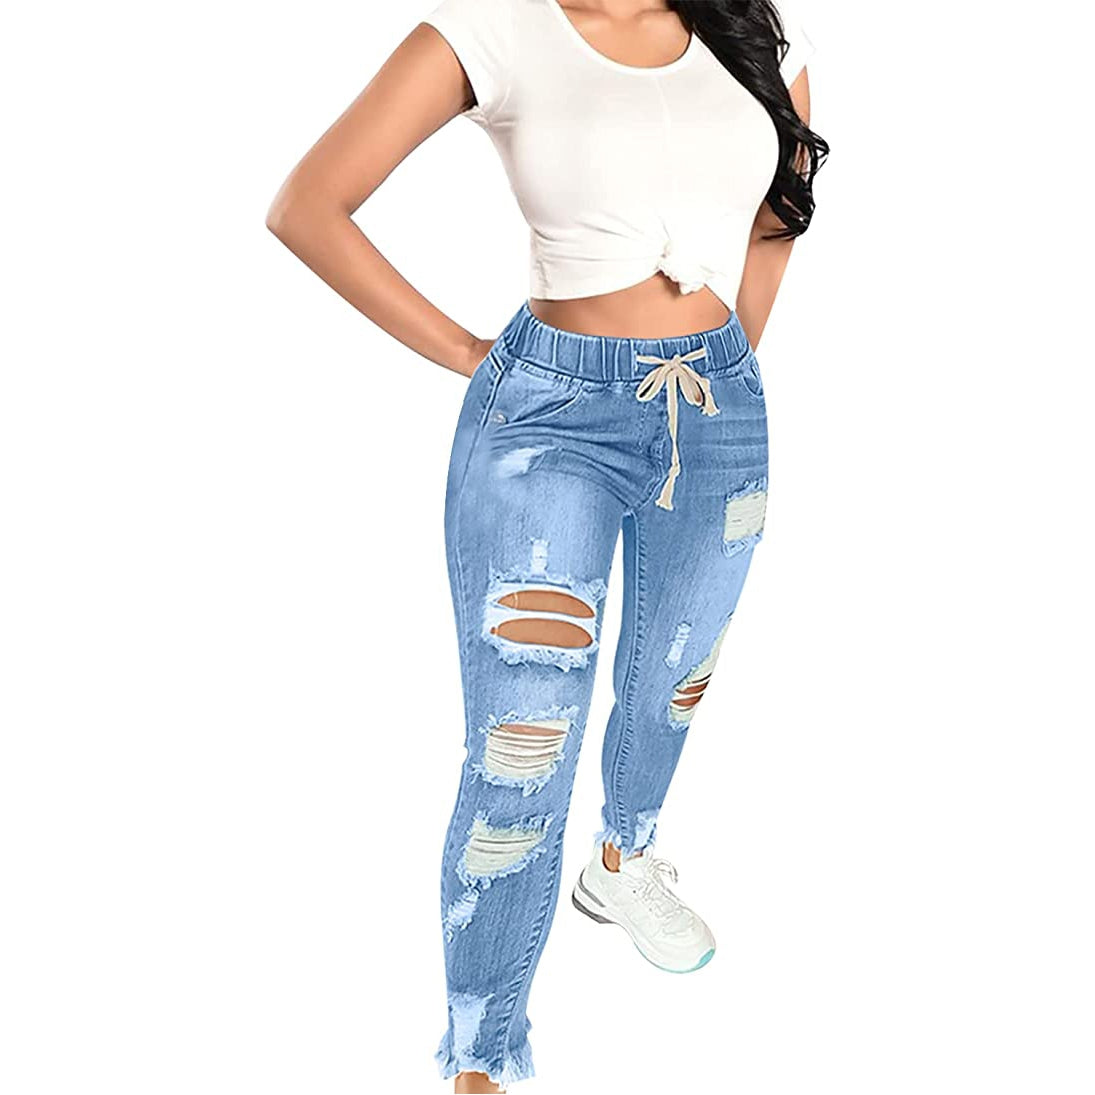 Women's Hip Lifting Slim Jeans High Waisted Pants Super Stretch